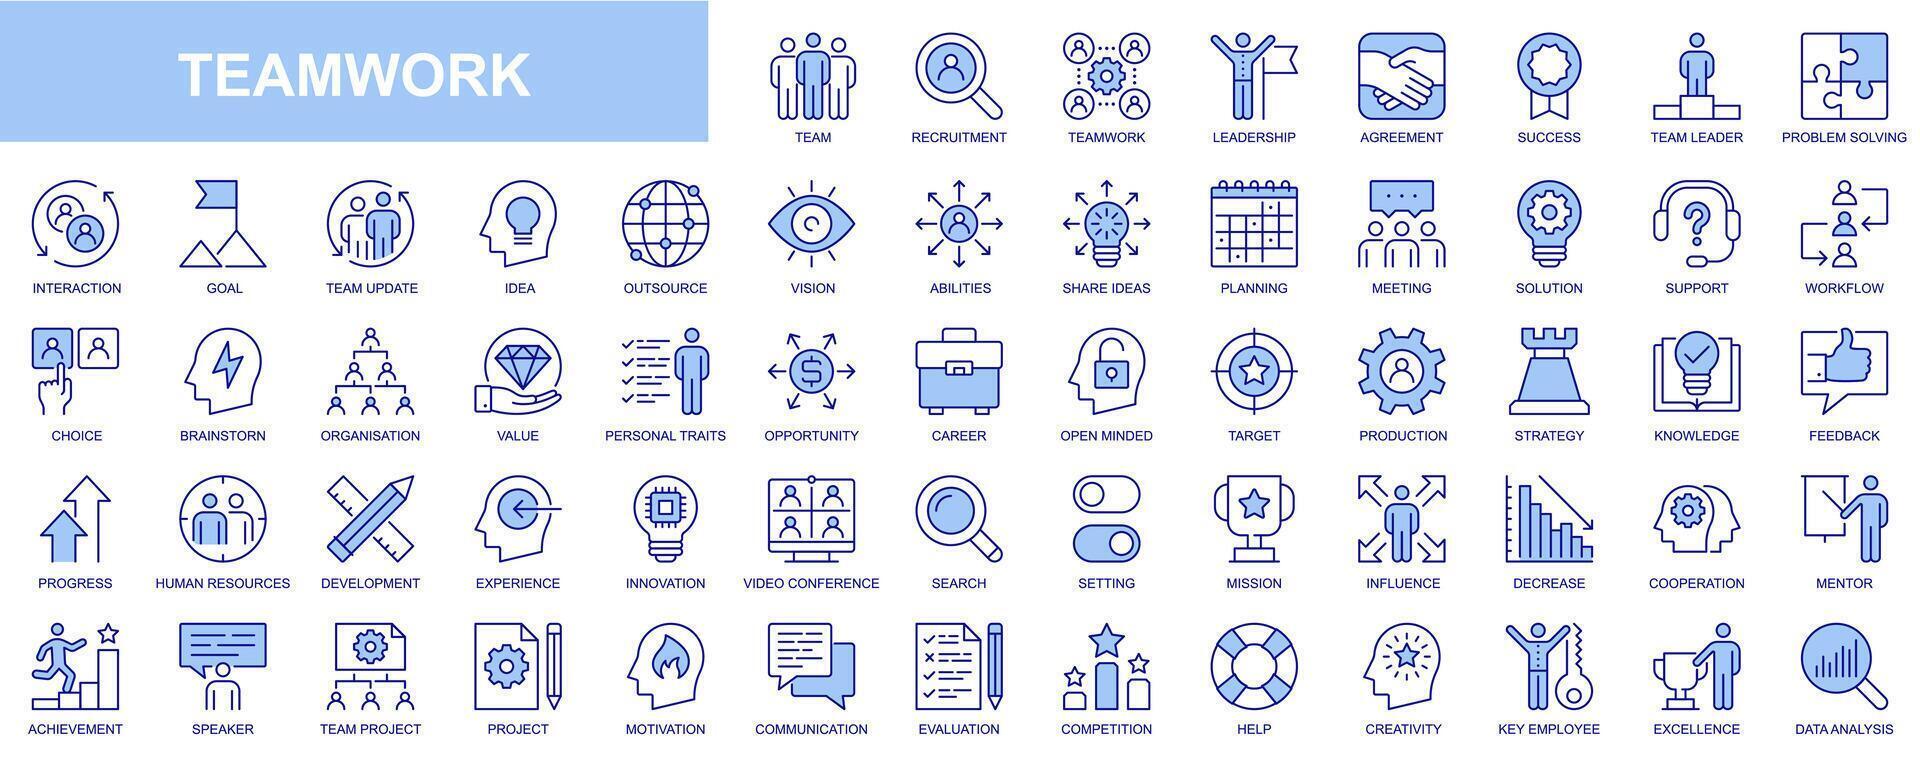 Teamwork web icons set in blue line design. Pack of team, recruitment, leadership, agreement, success, leader, problem solving, interaction, goal, idea, vision, other. Vector outline stroke pictograms